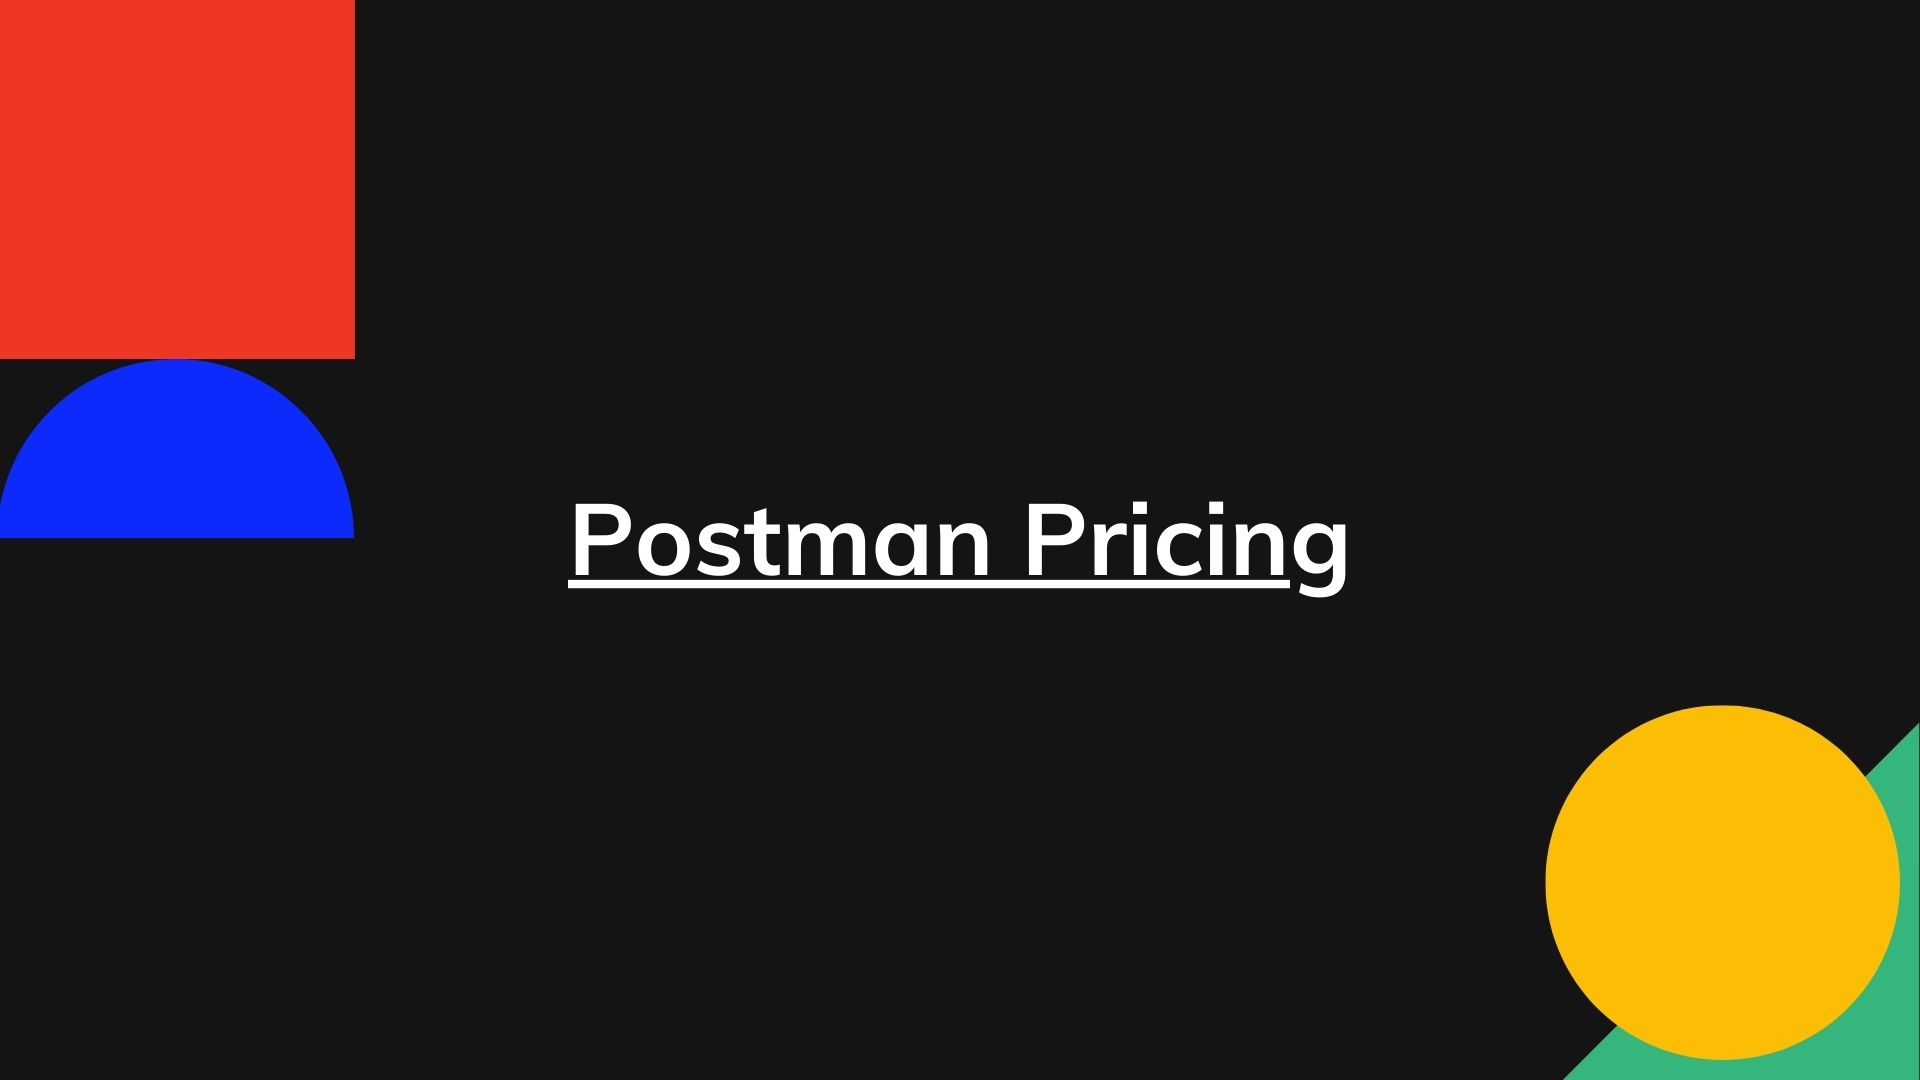 Postman Pricing – Actual Prices for All Plans, Enterprise Too